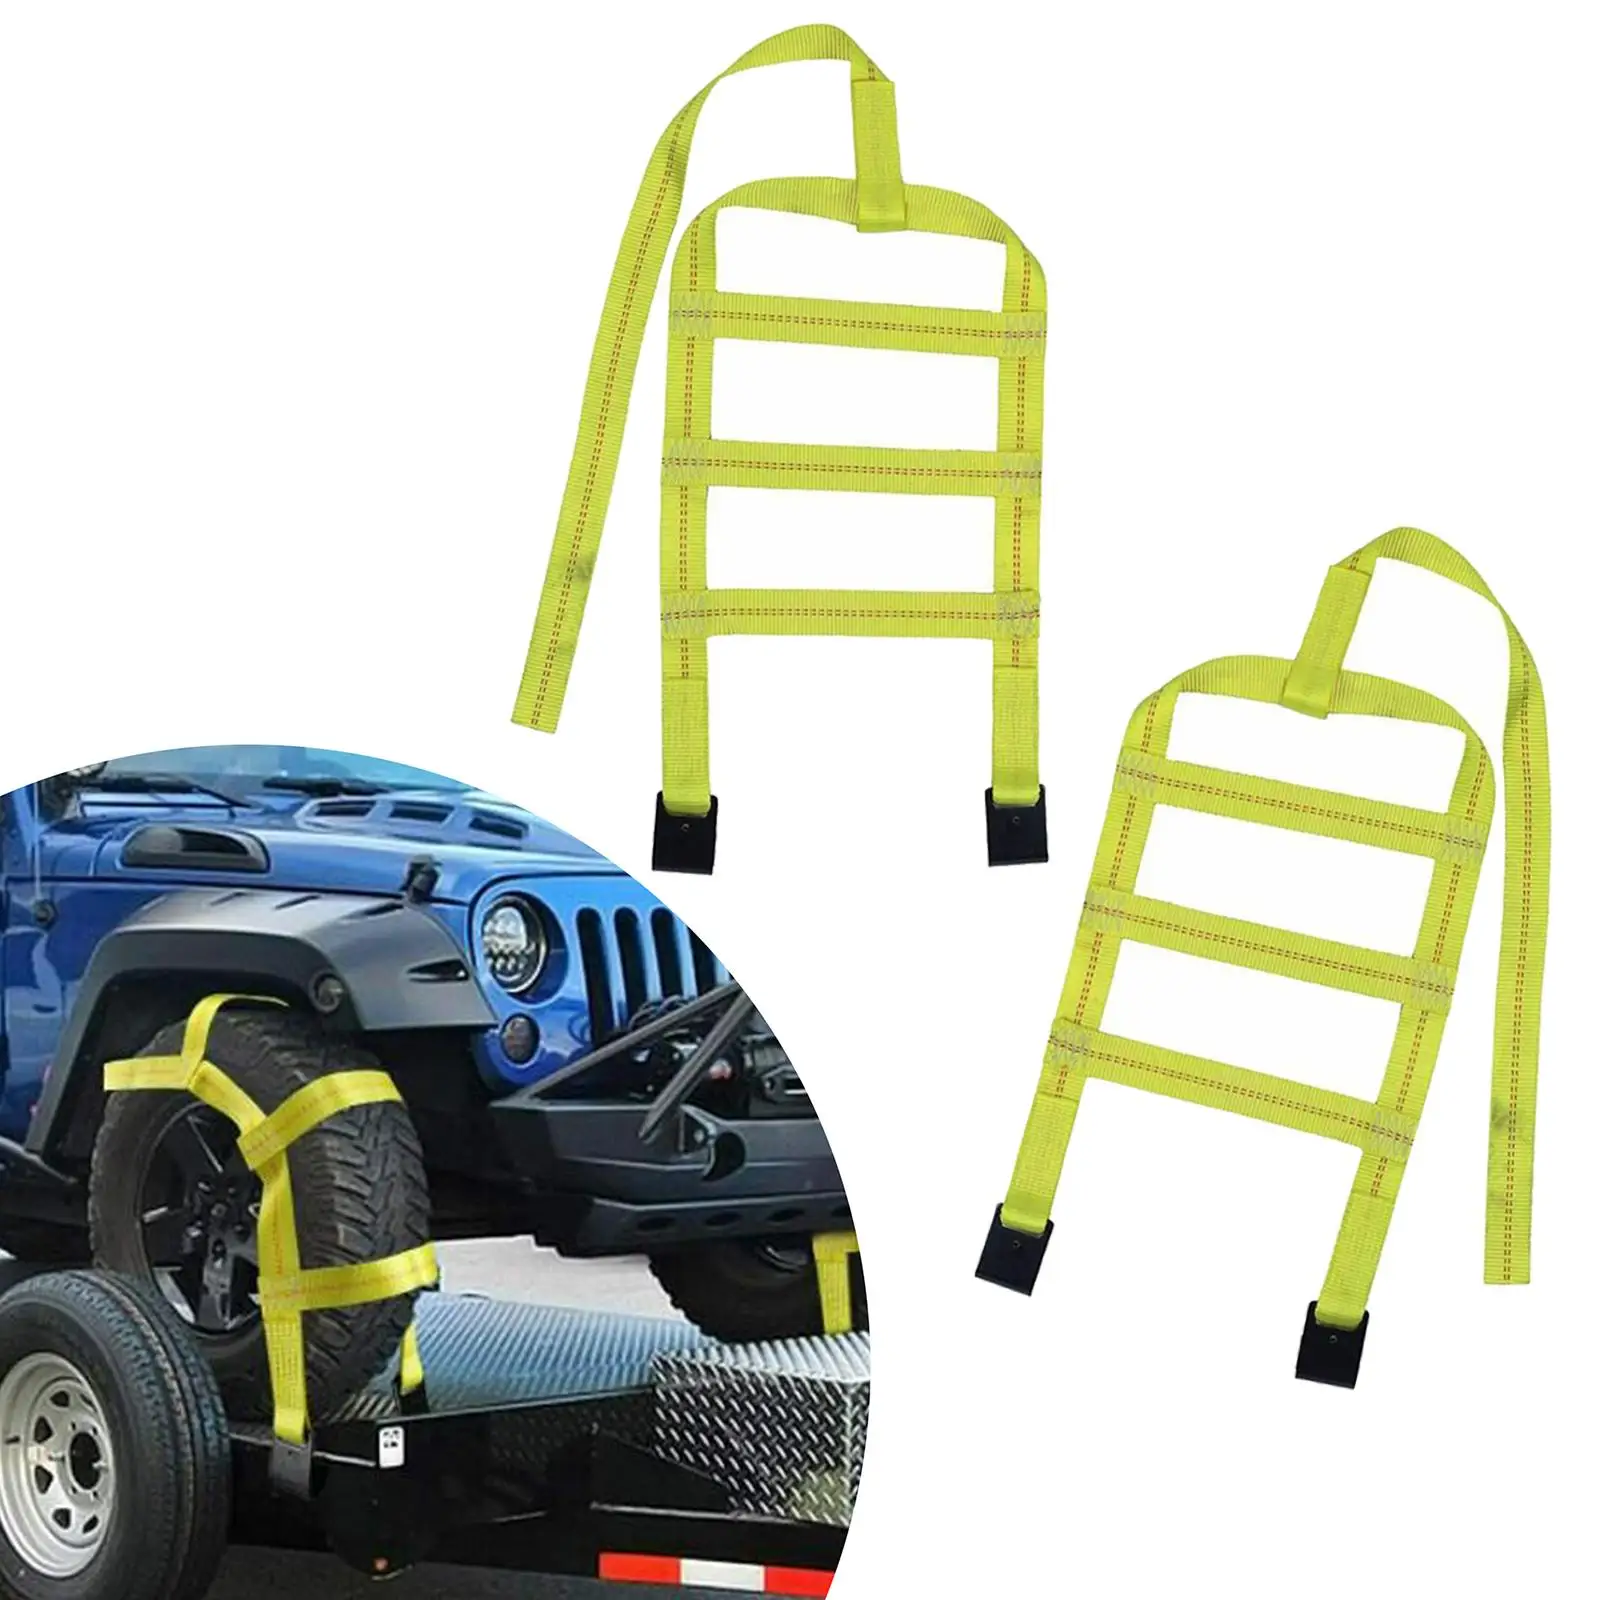 Tow Straps/ with Flat Hooks /Net Basket/ Heavy Duty /Adjustable/ Yellow/ Universal/ Car Basket Straps/ for 14-17inch Tires